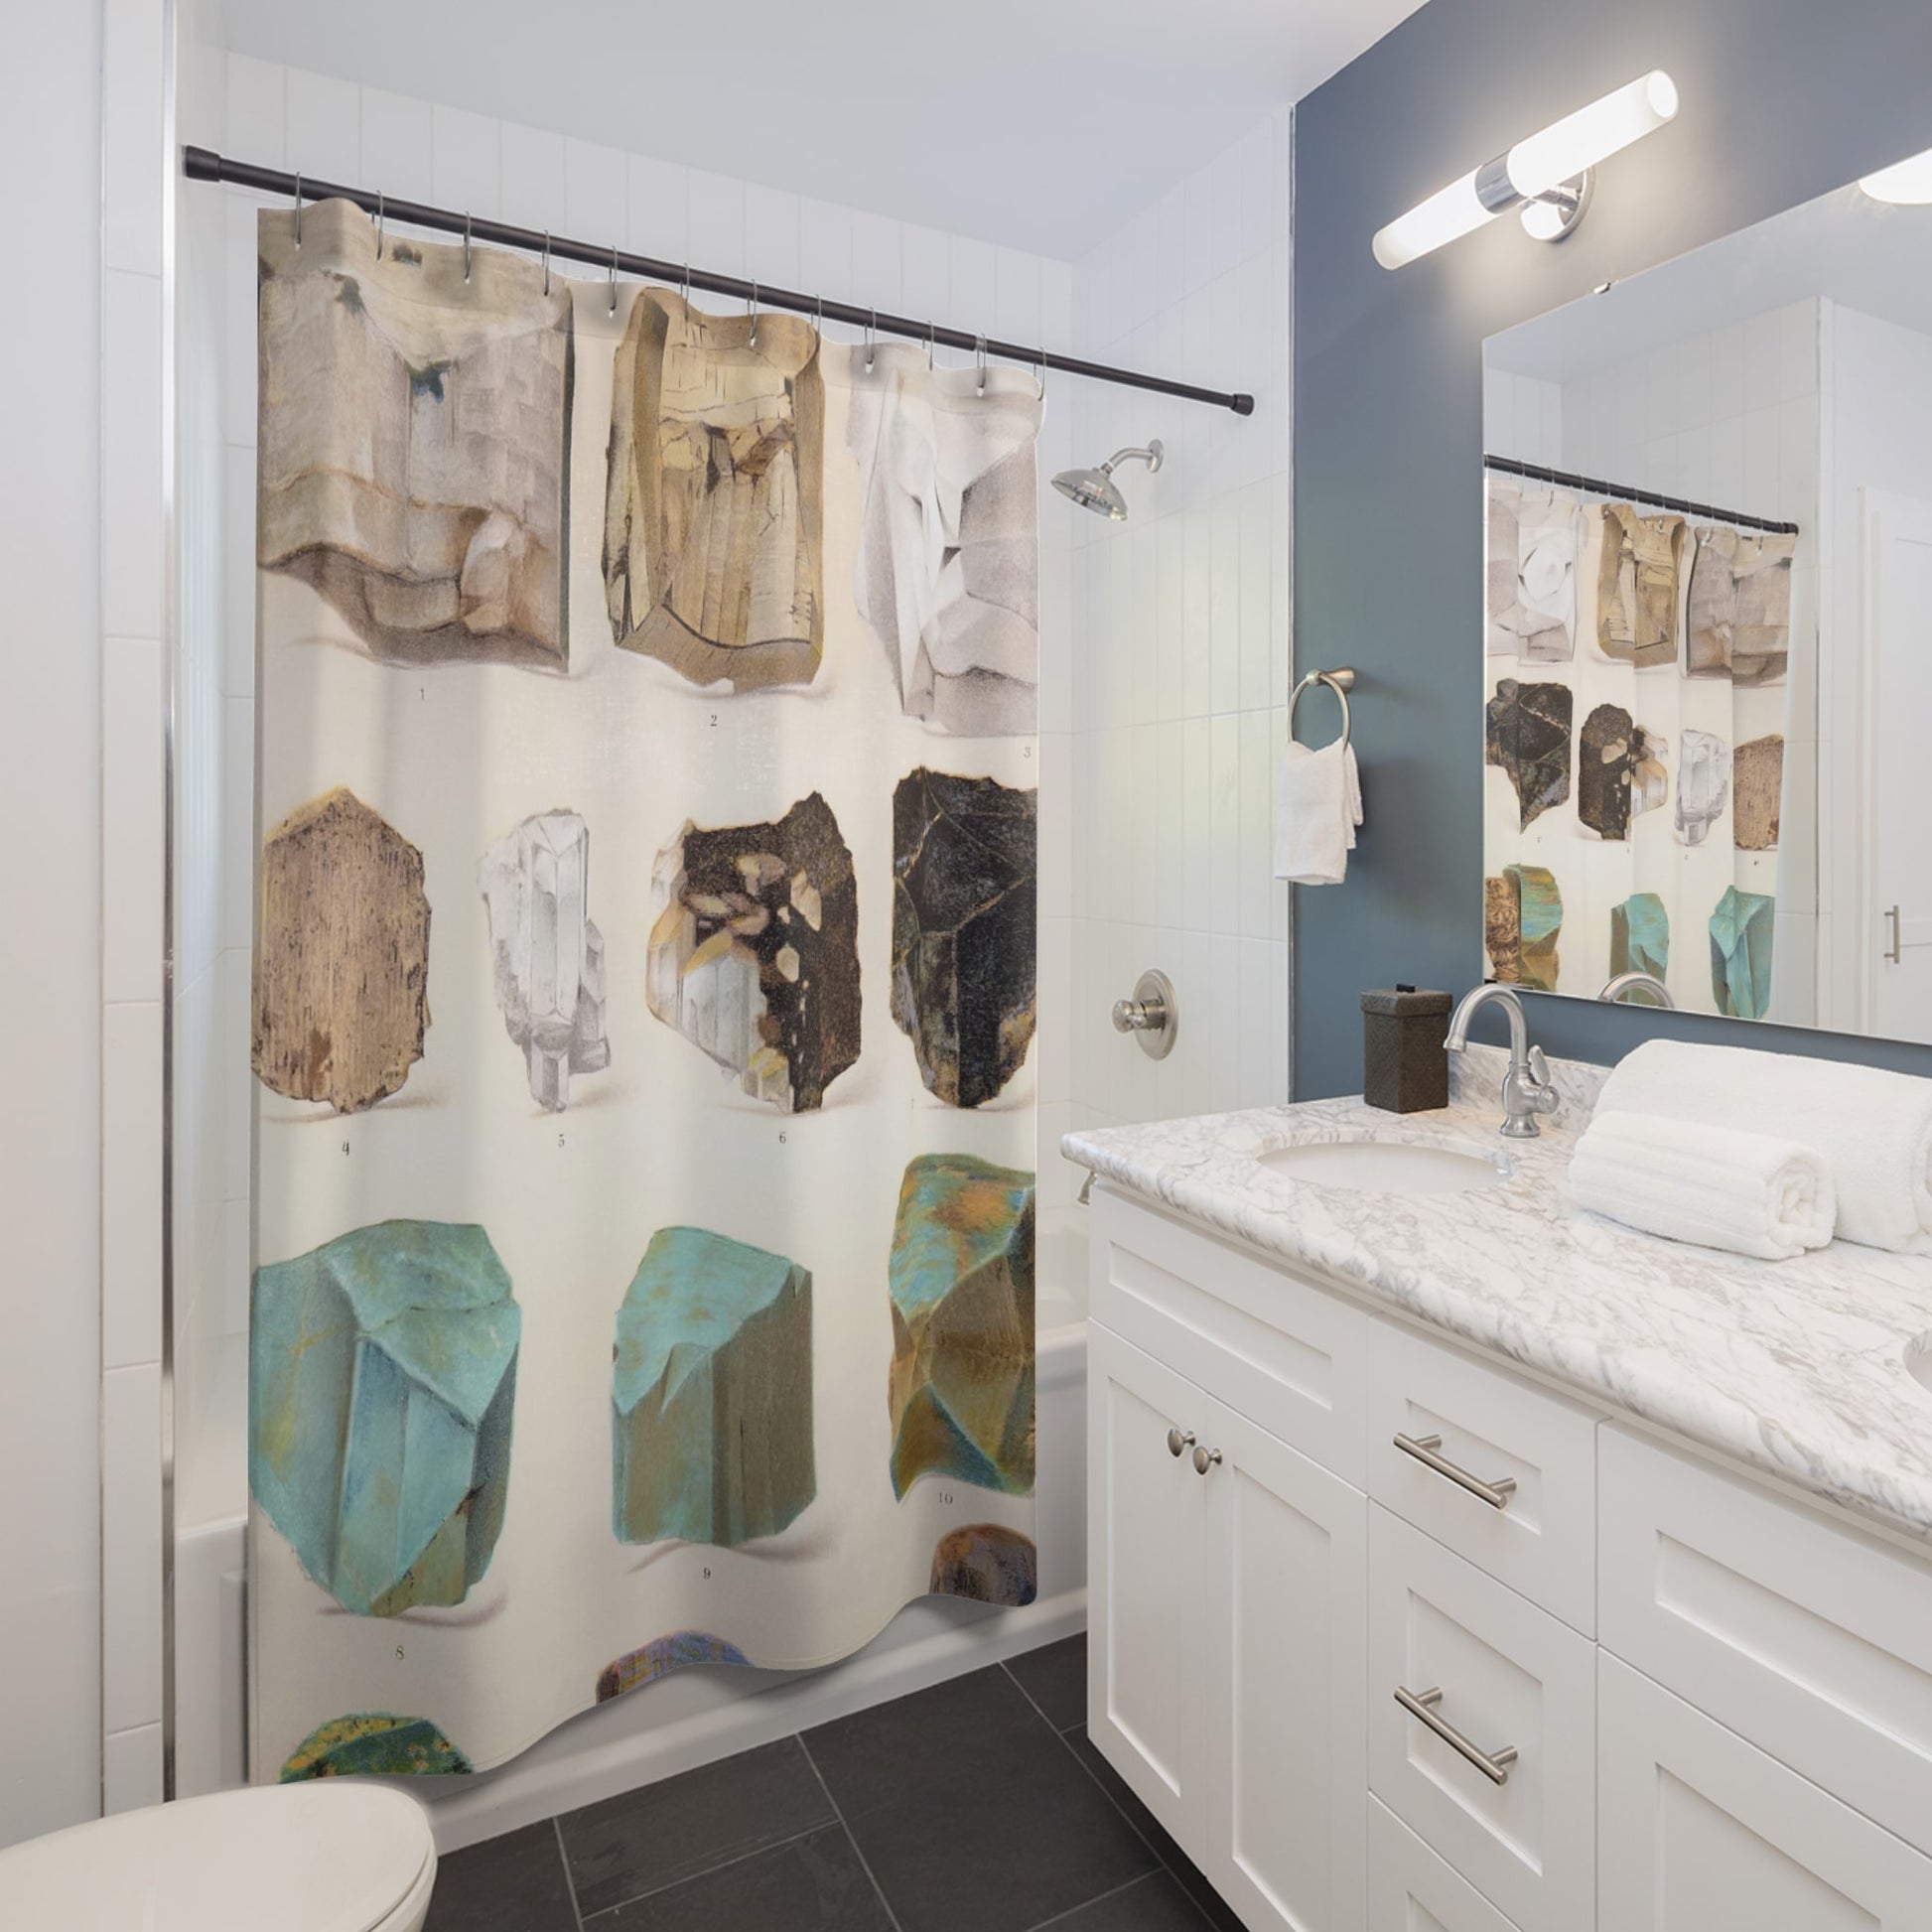 Raw Crystals and Gemstones Shower Curtain Best Bathroom Decorating Ideas for Science Decor